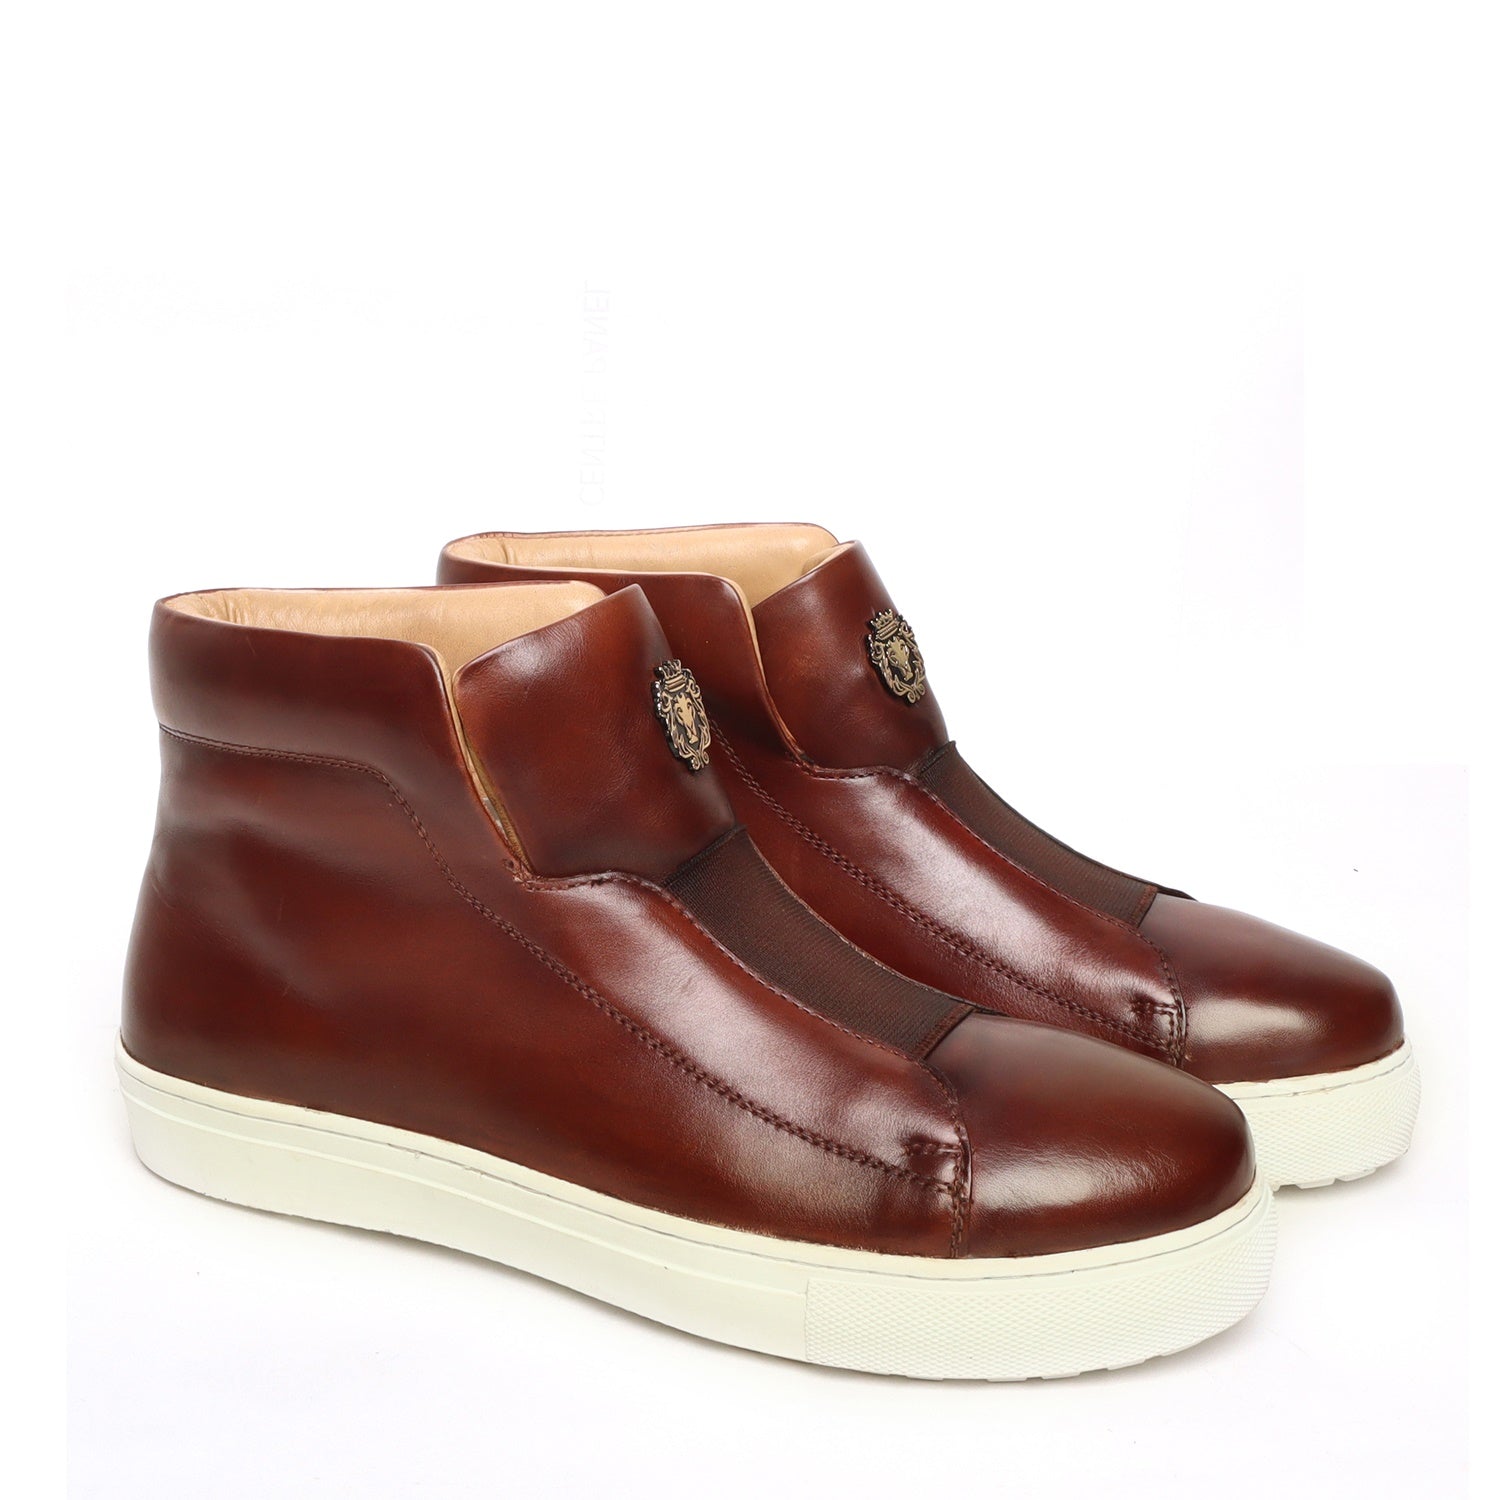 Brown Leather Mid-Top Sneakers with Stretchable Strap by Brune & Bareskin